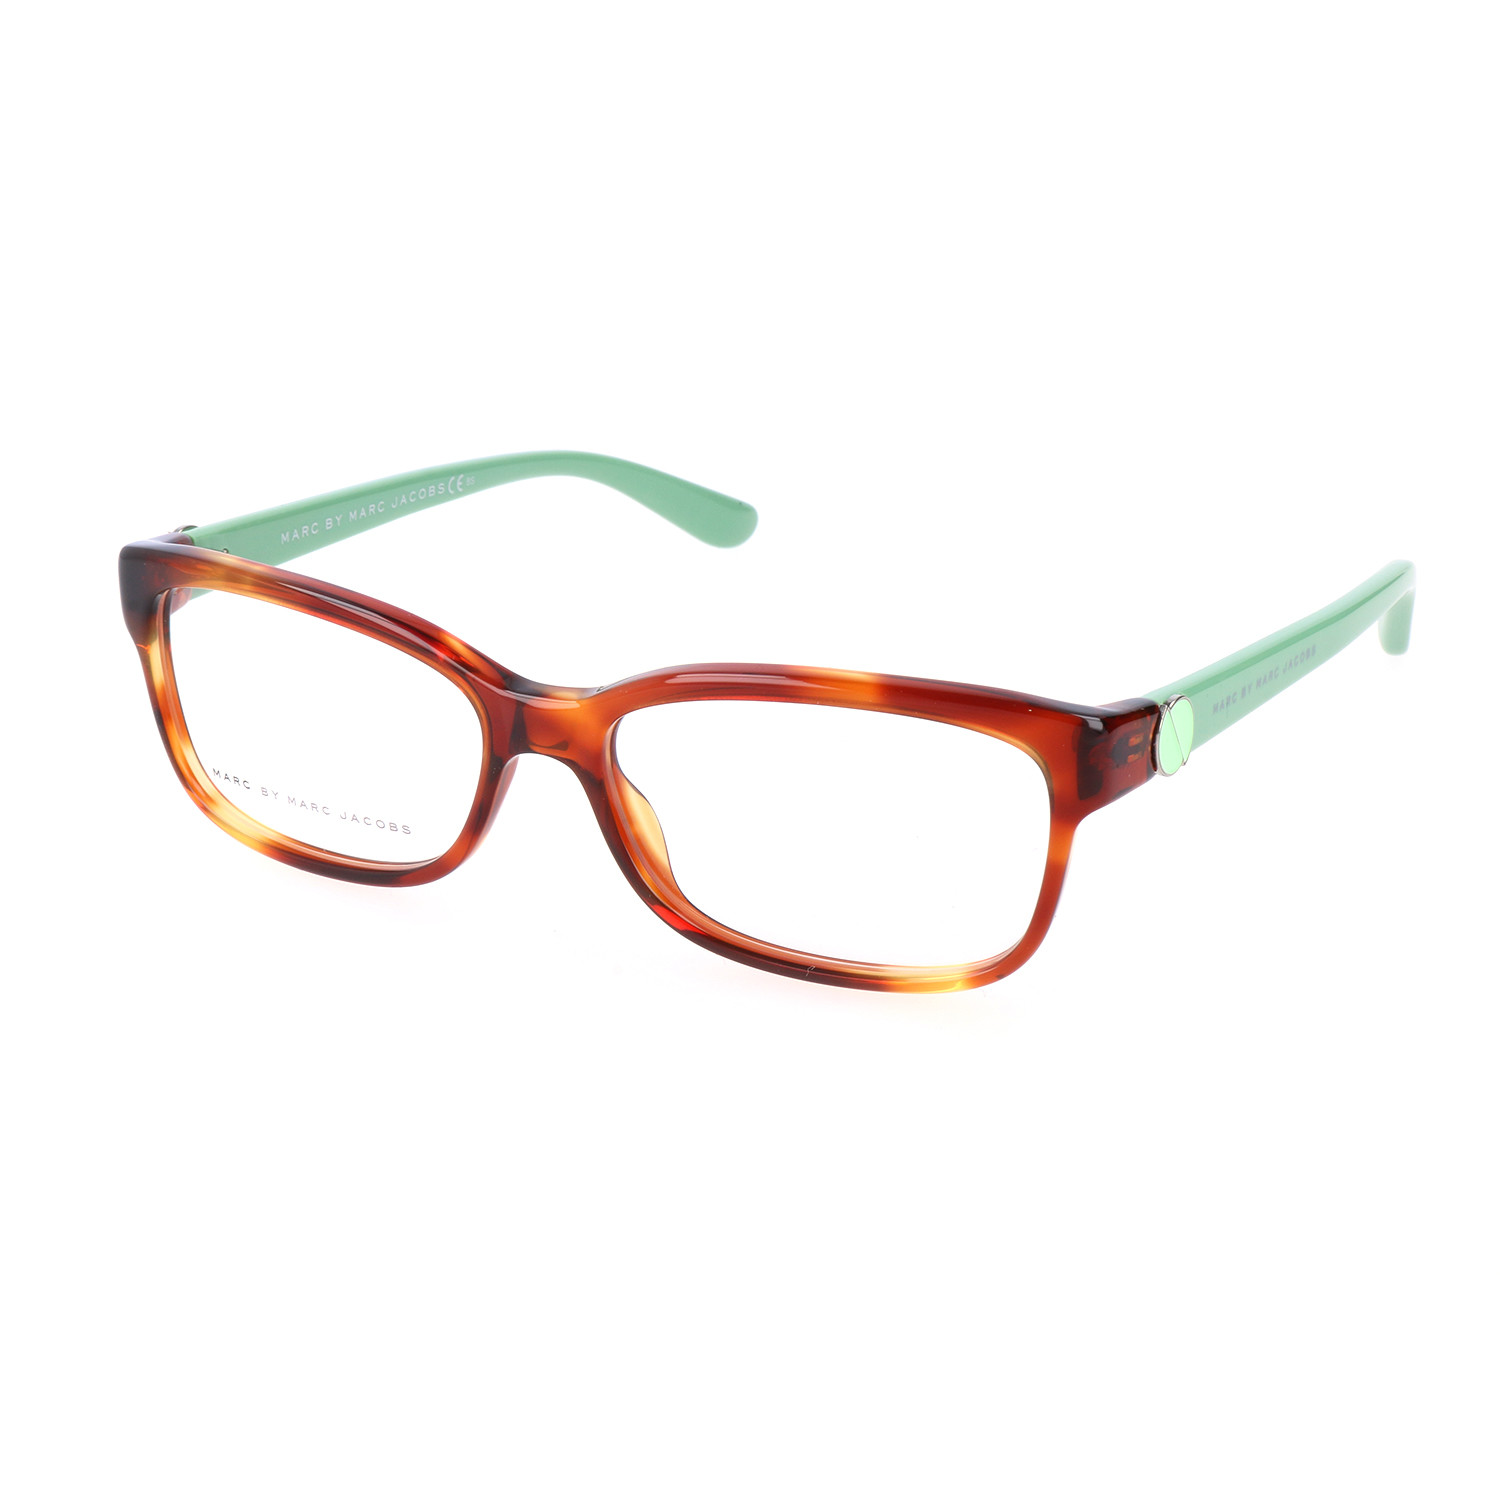 Elliot Frame // Amber + Mint - Marc By Marc Jacobs - Touch of Modern